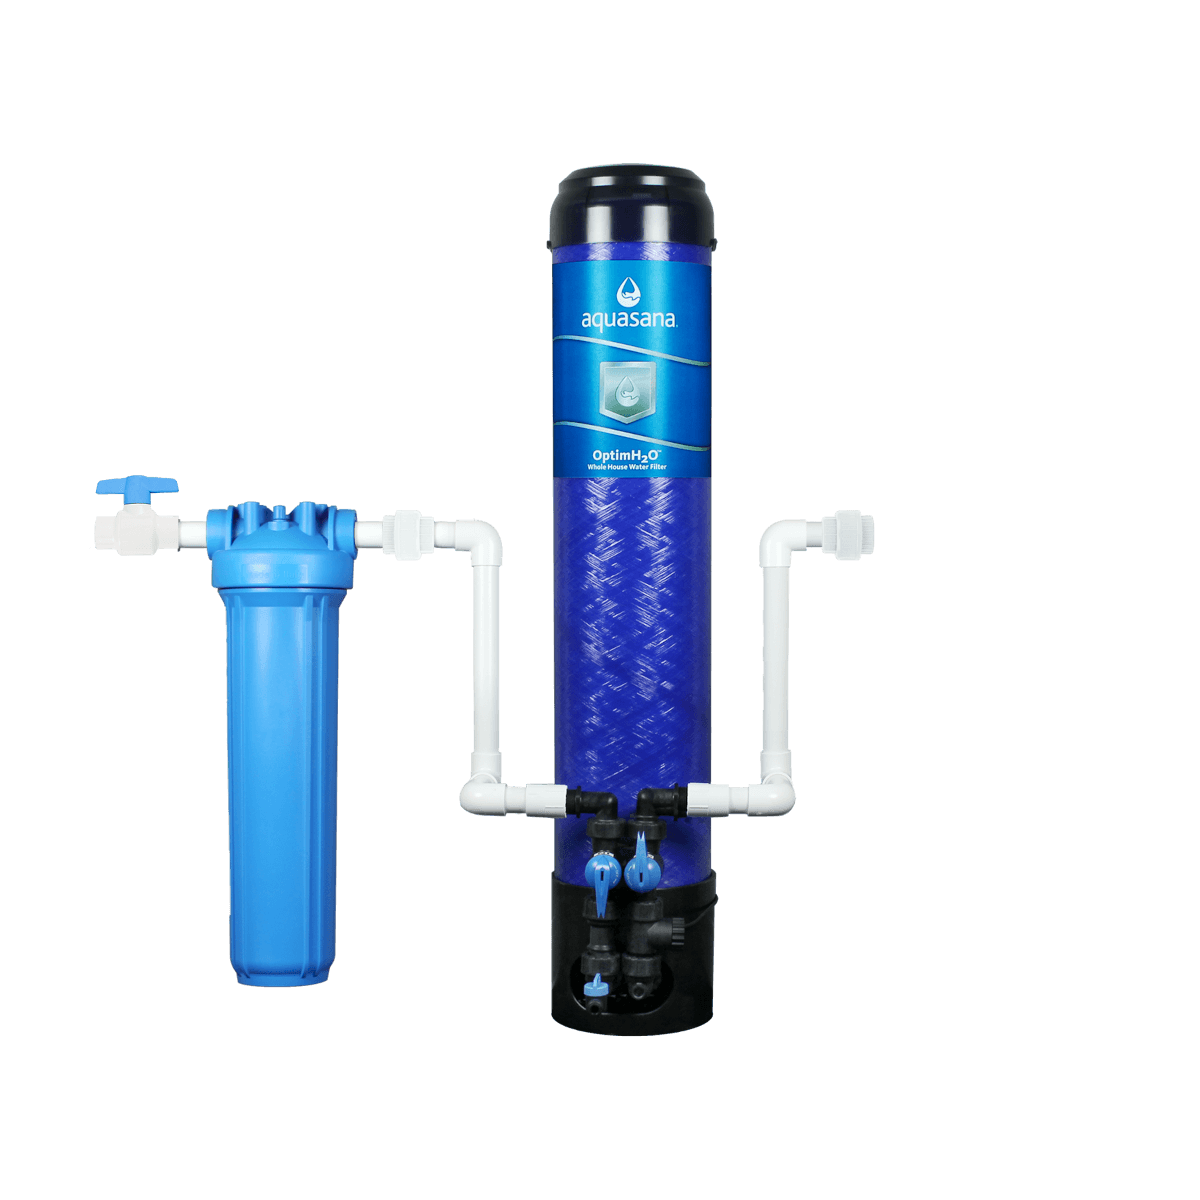 OptimH2O® Whole House Water Filter Complete System for Home Reduces Lead, Cysts, & PFOA/PFOS Aquasana